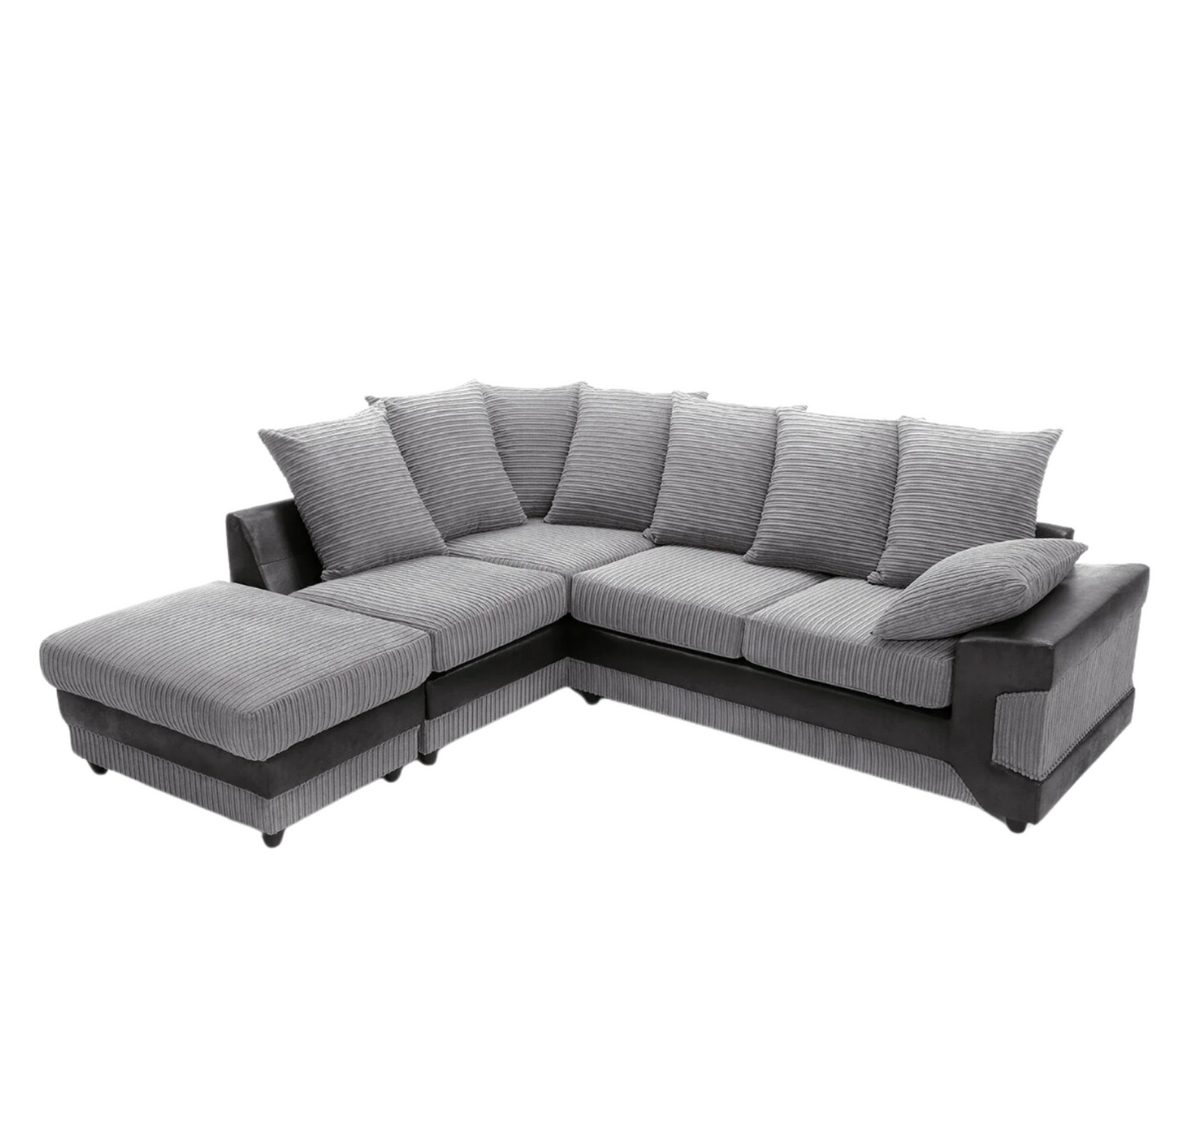 Dino 5-Seater Corner Sofa, Relaxation in Every Corner (Scatter Back)